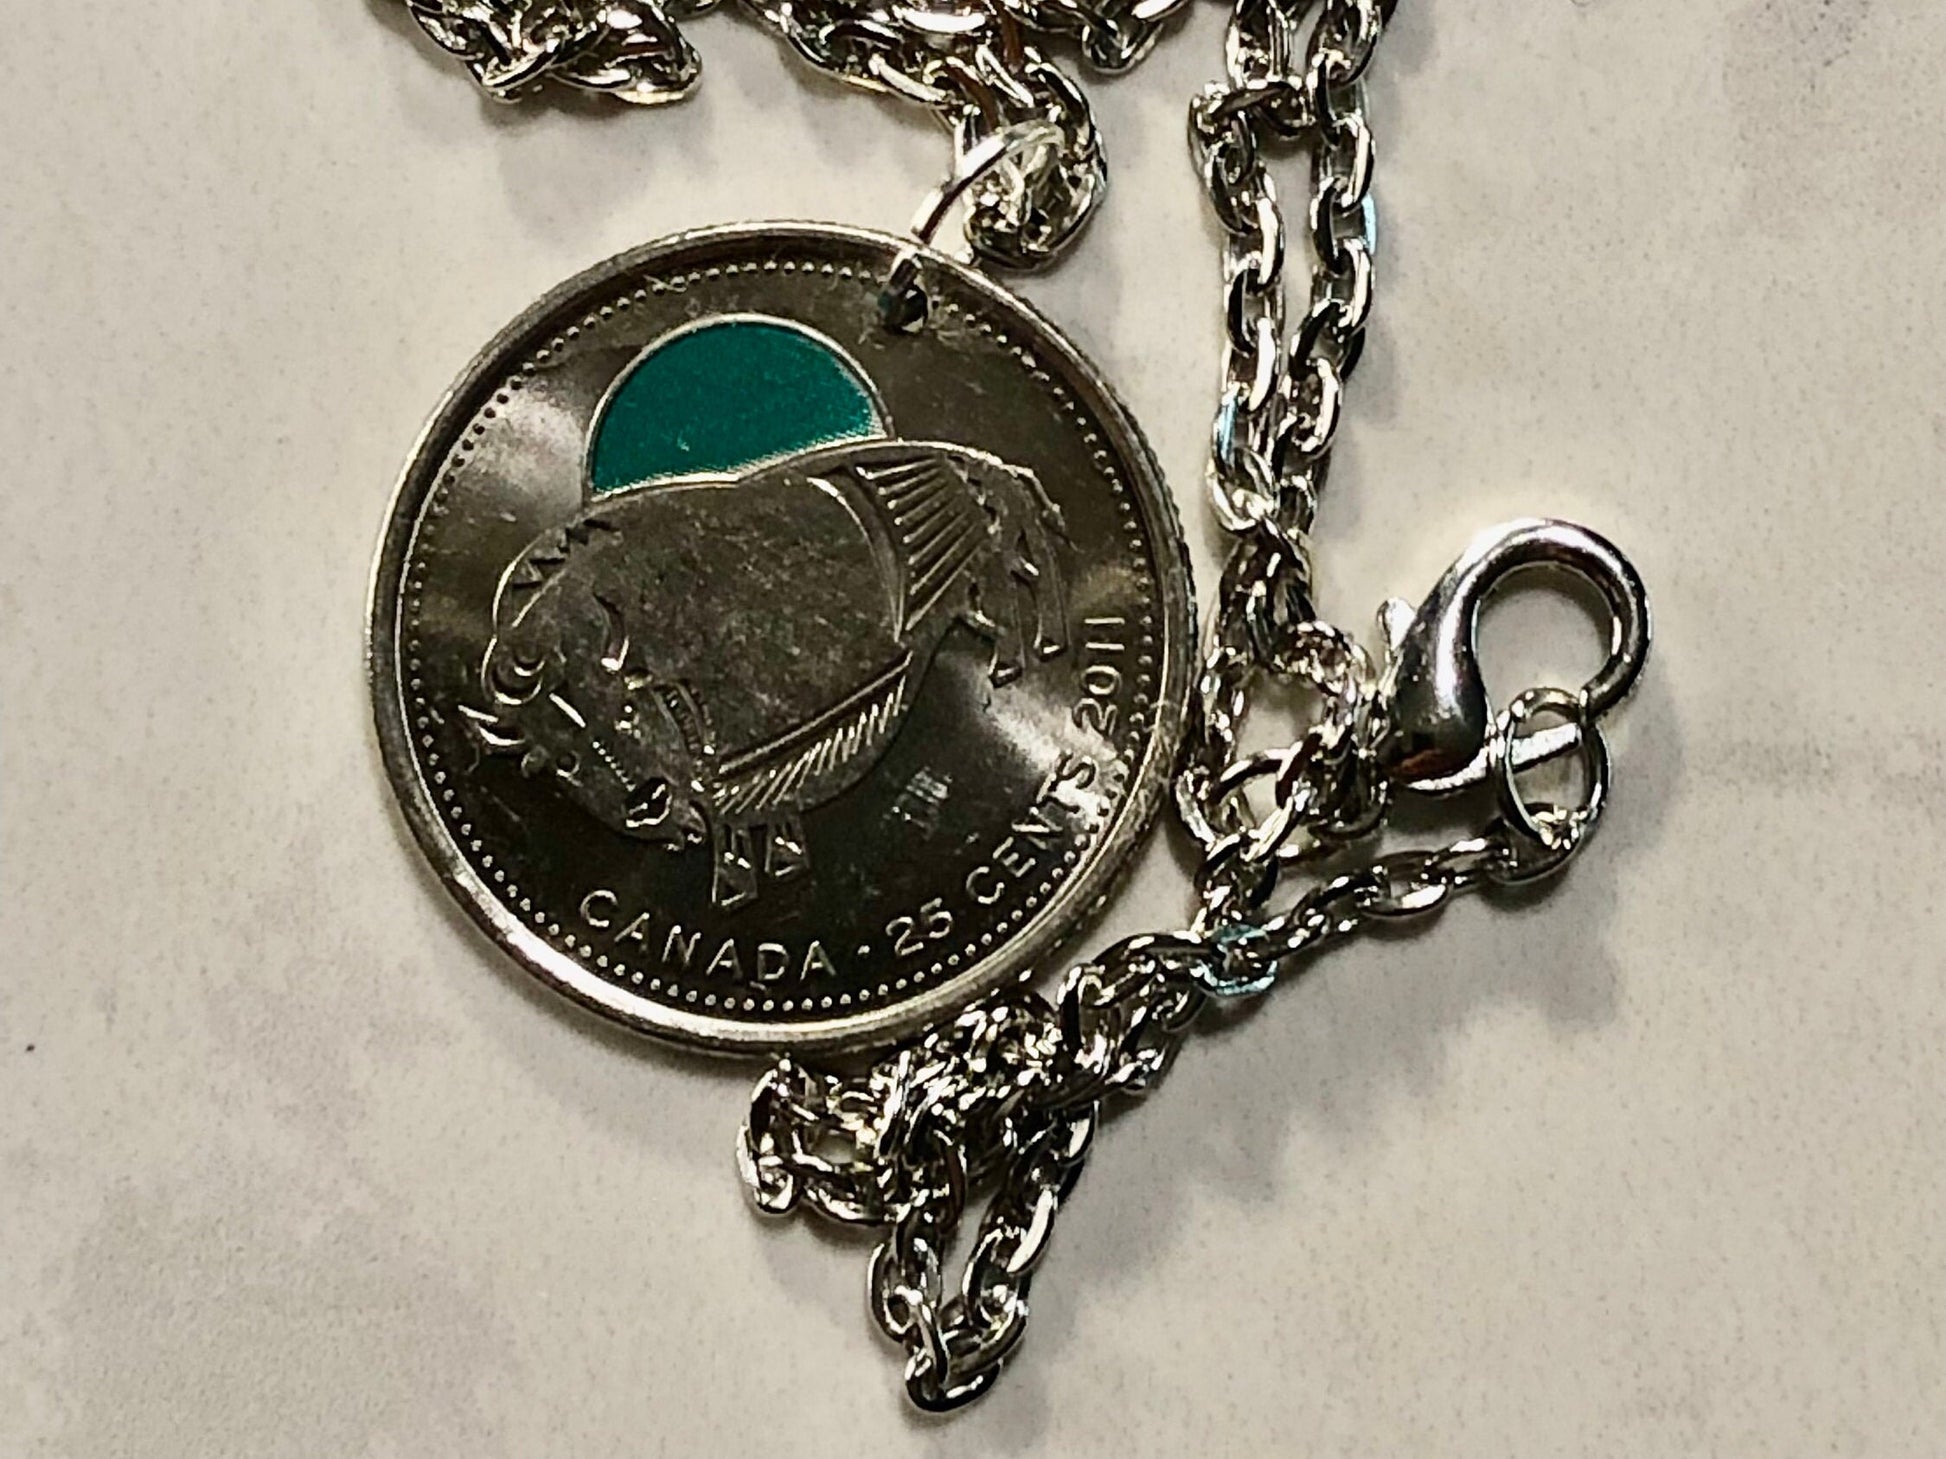 Canadian Quarter Coin Necklace 2011 Wood Bison Coloured Uncirculated 25 Cents Custom Made Vintage and Rare coins - Coin Enthusiast Canada